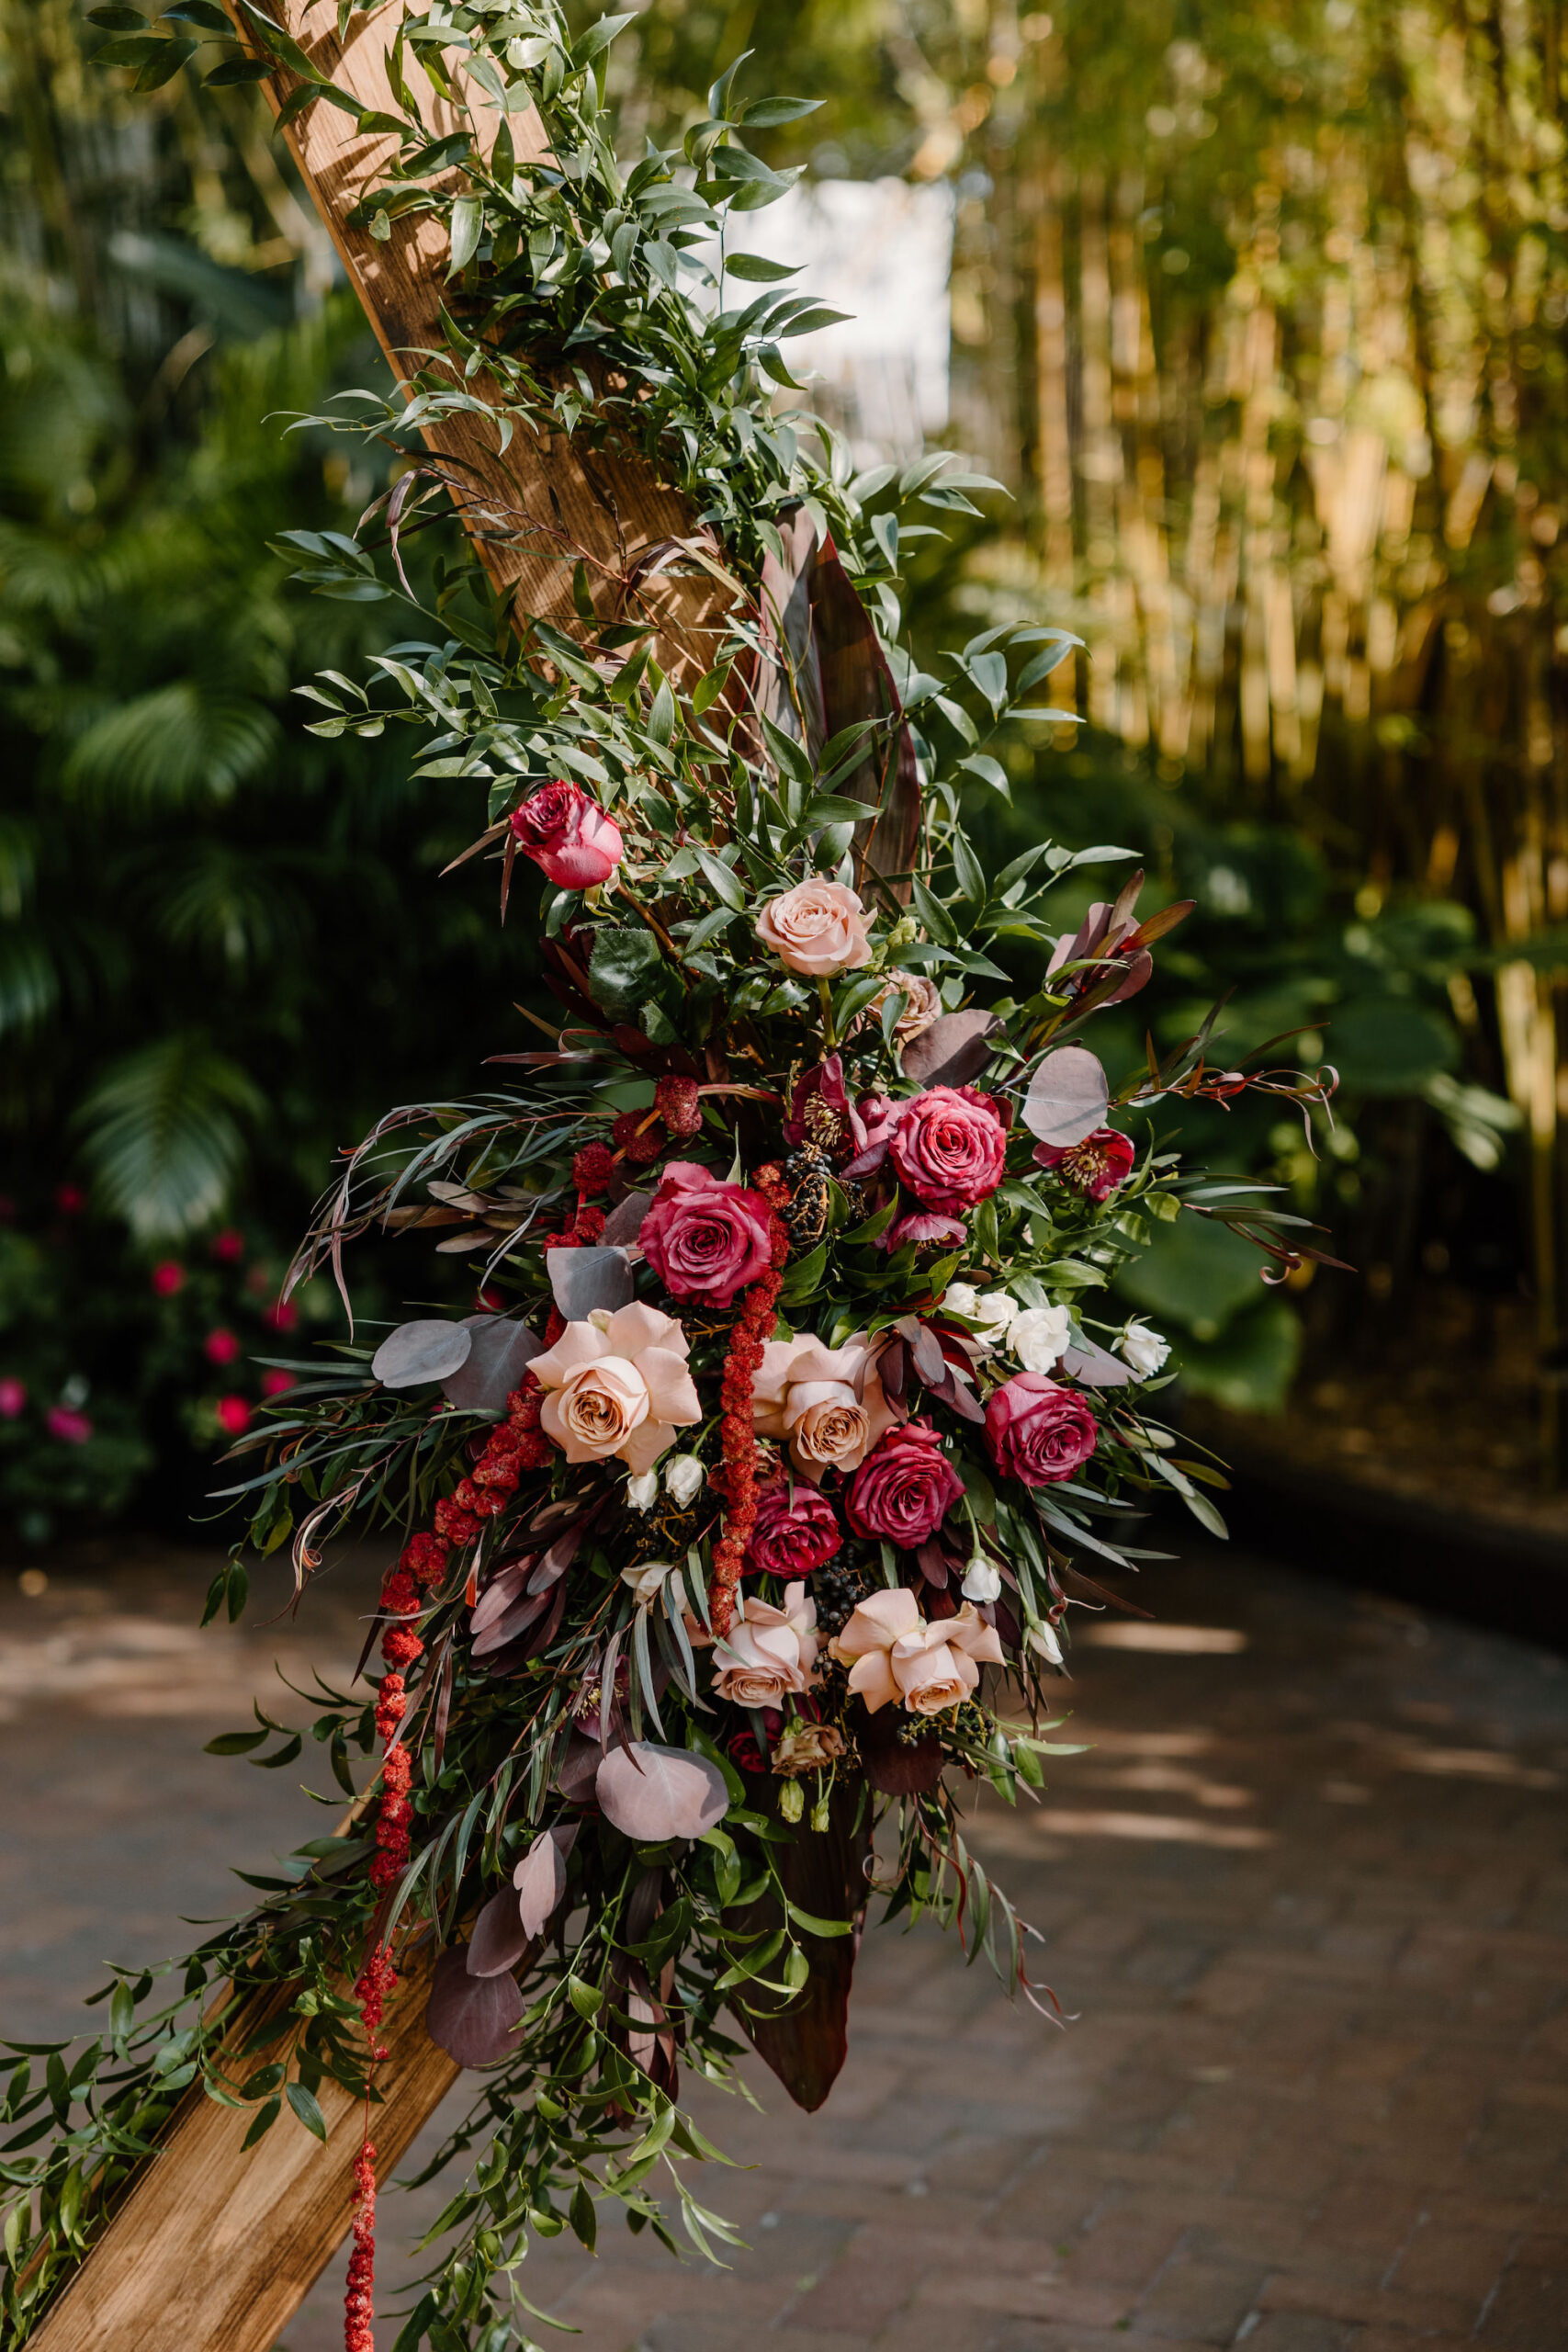 Red, Blush, White roses, and Greenery Gothic Wedding Ceremony Arch Floral Arrangement Inspiration